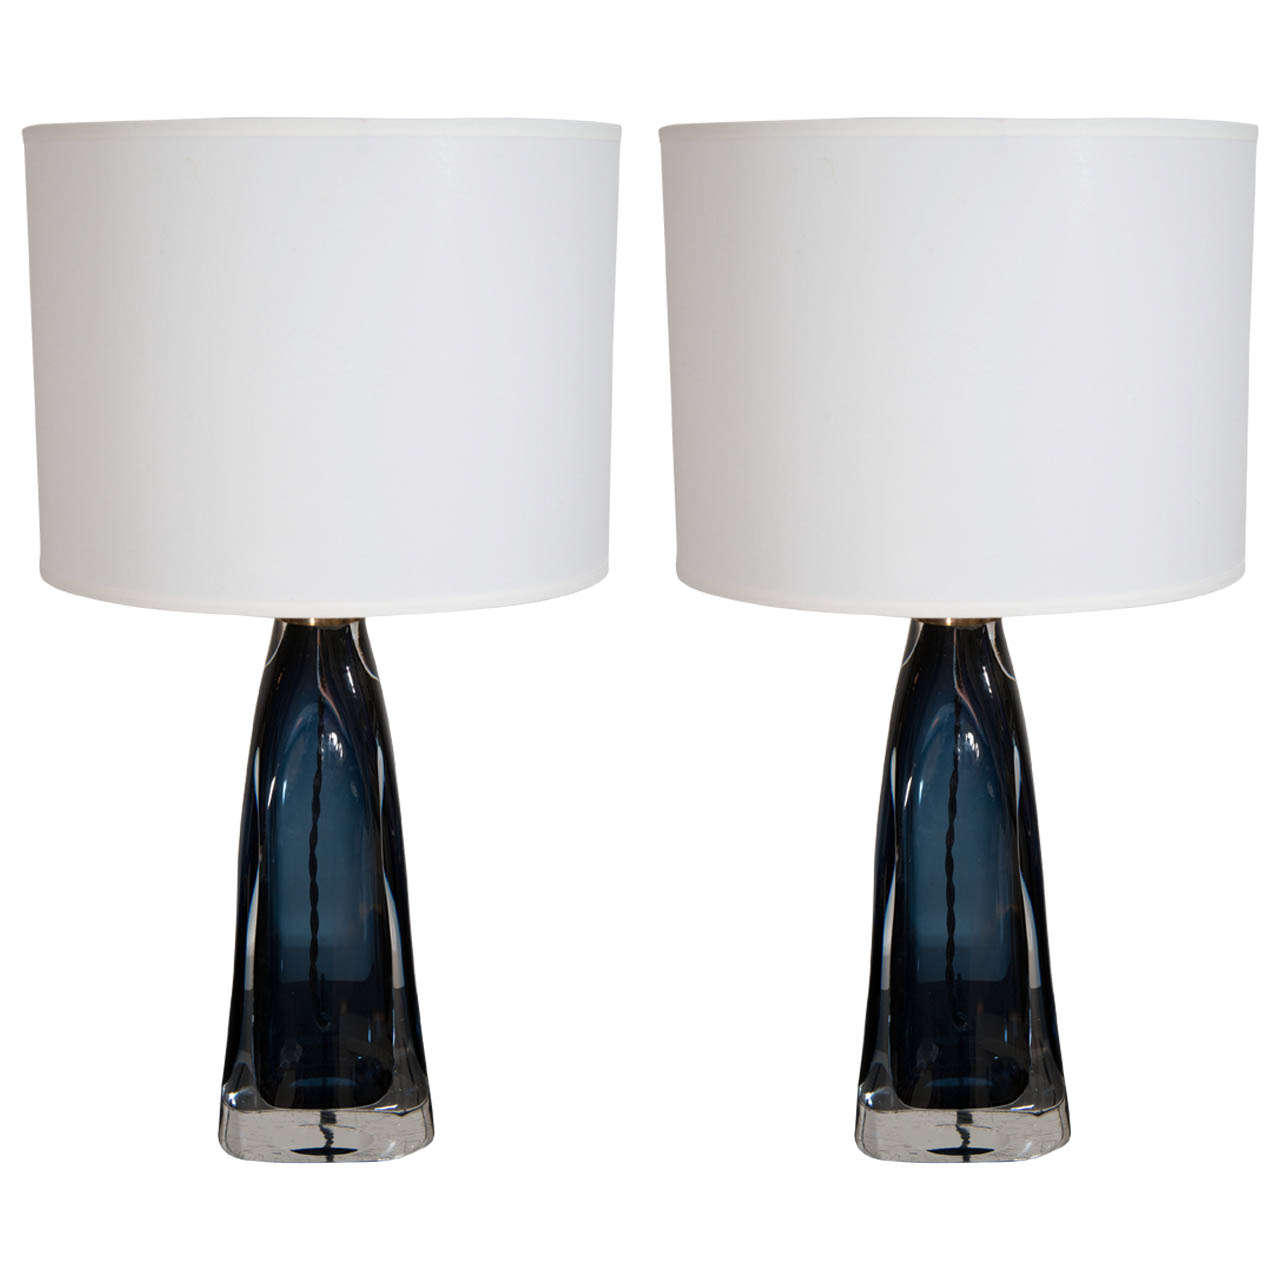 A Pair of Orrefors Crystal Lamps